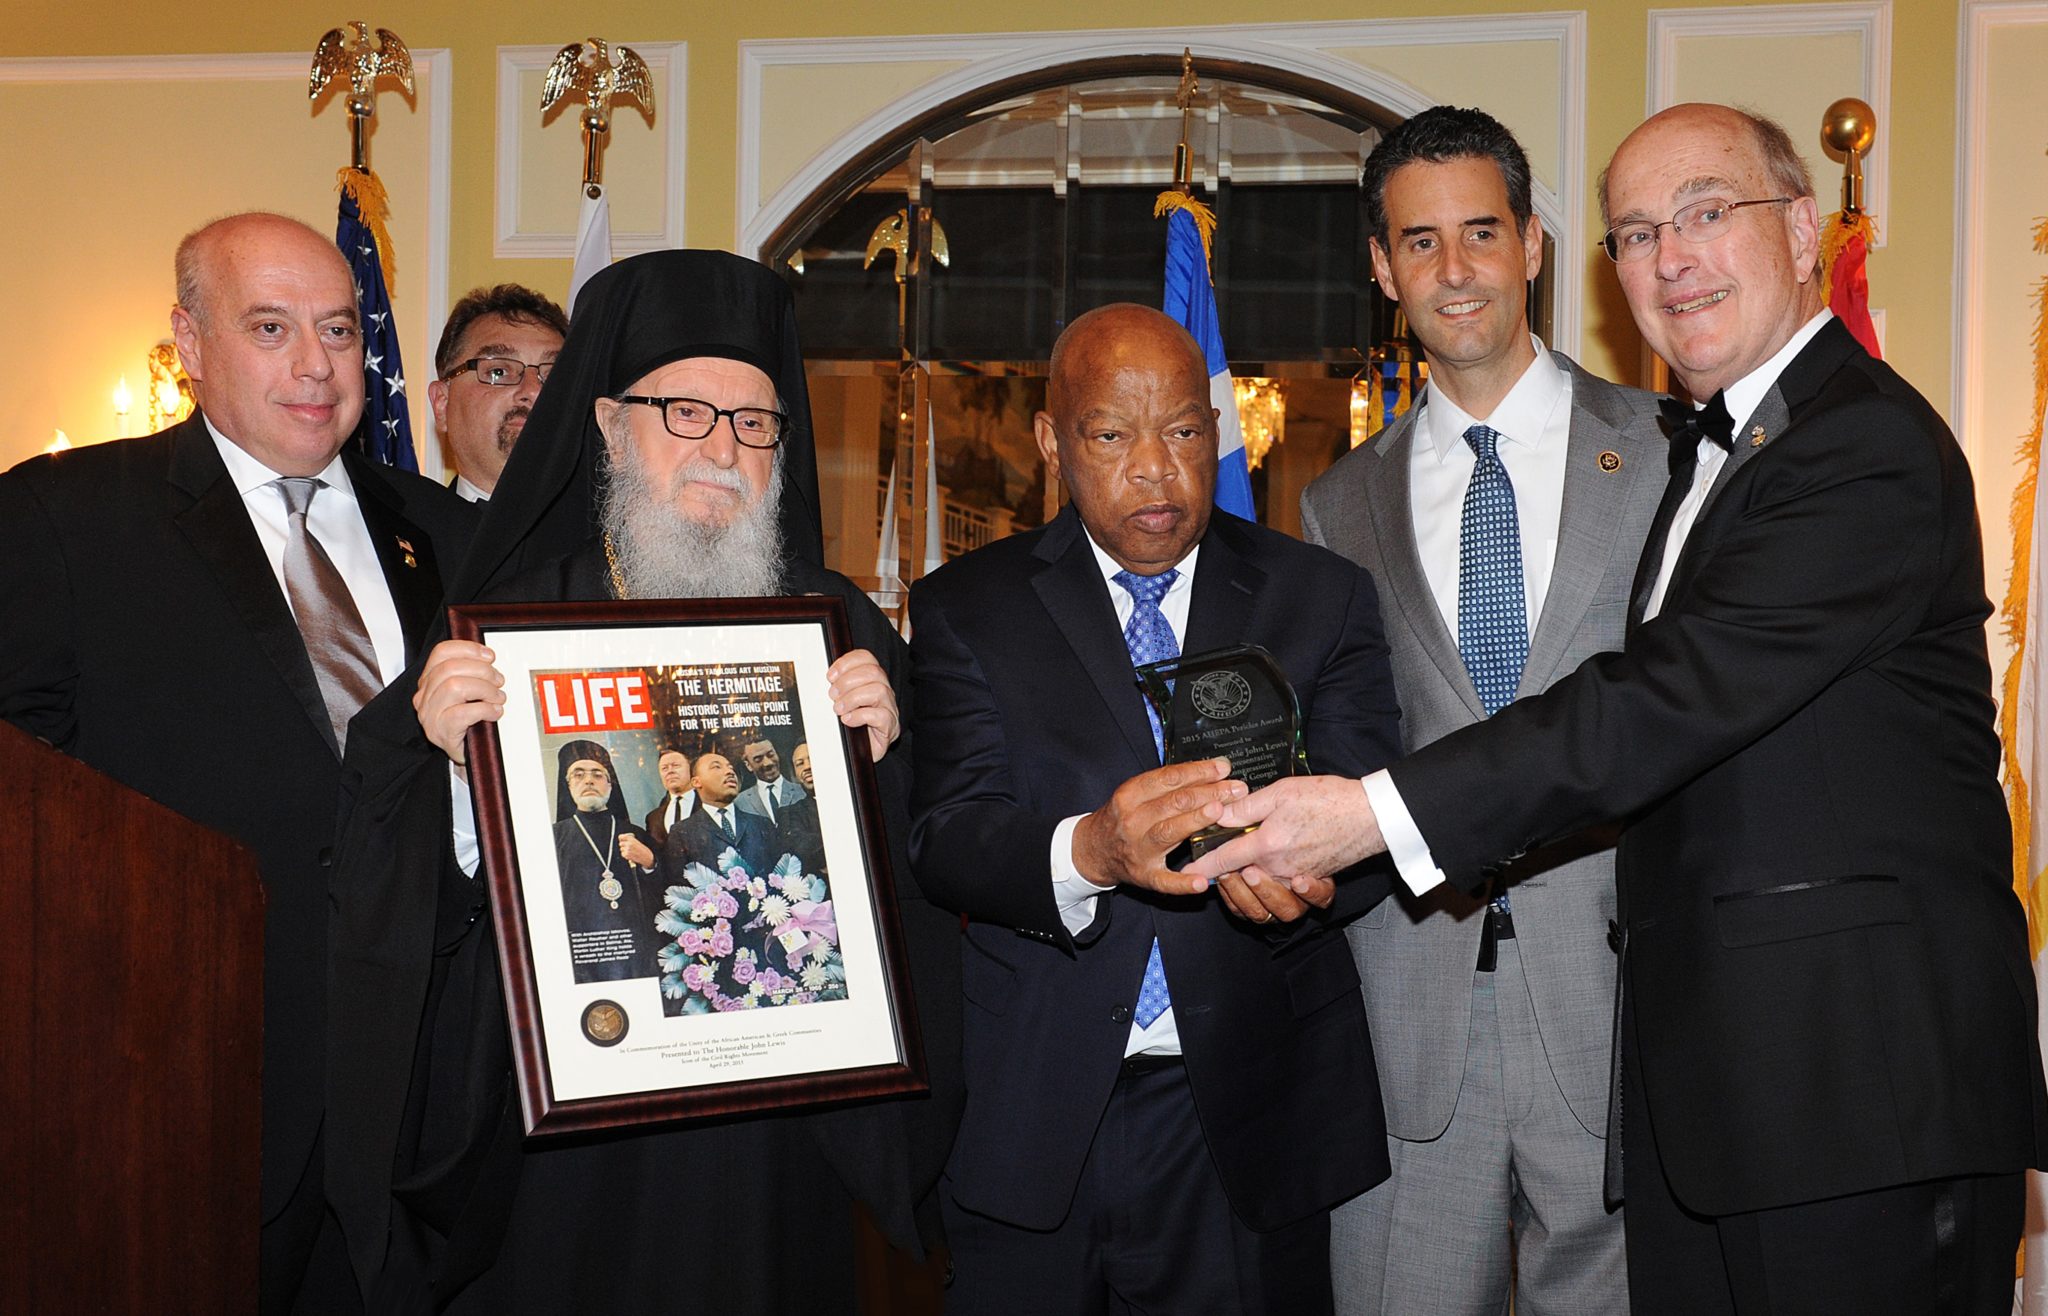 Congressman John Lewis of Georgia was the recipient of the 2015 AHEPA Pericles Award during Wednesday night's 41st AHEPA Biennial National Banquet in Washington, DC.